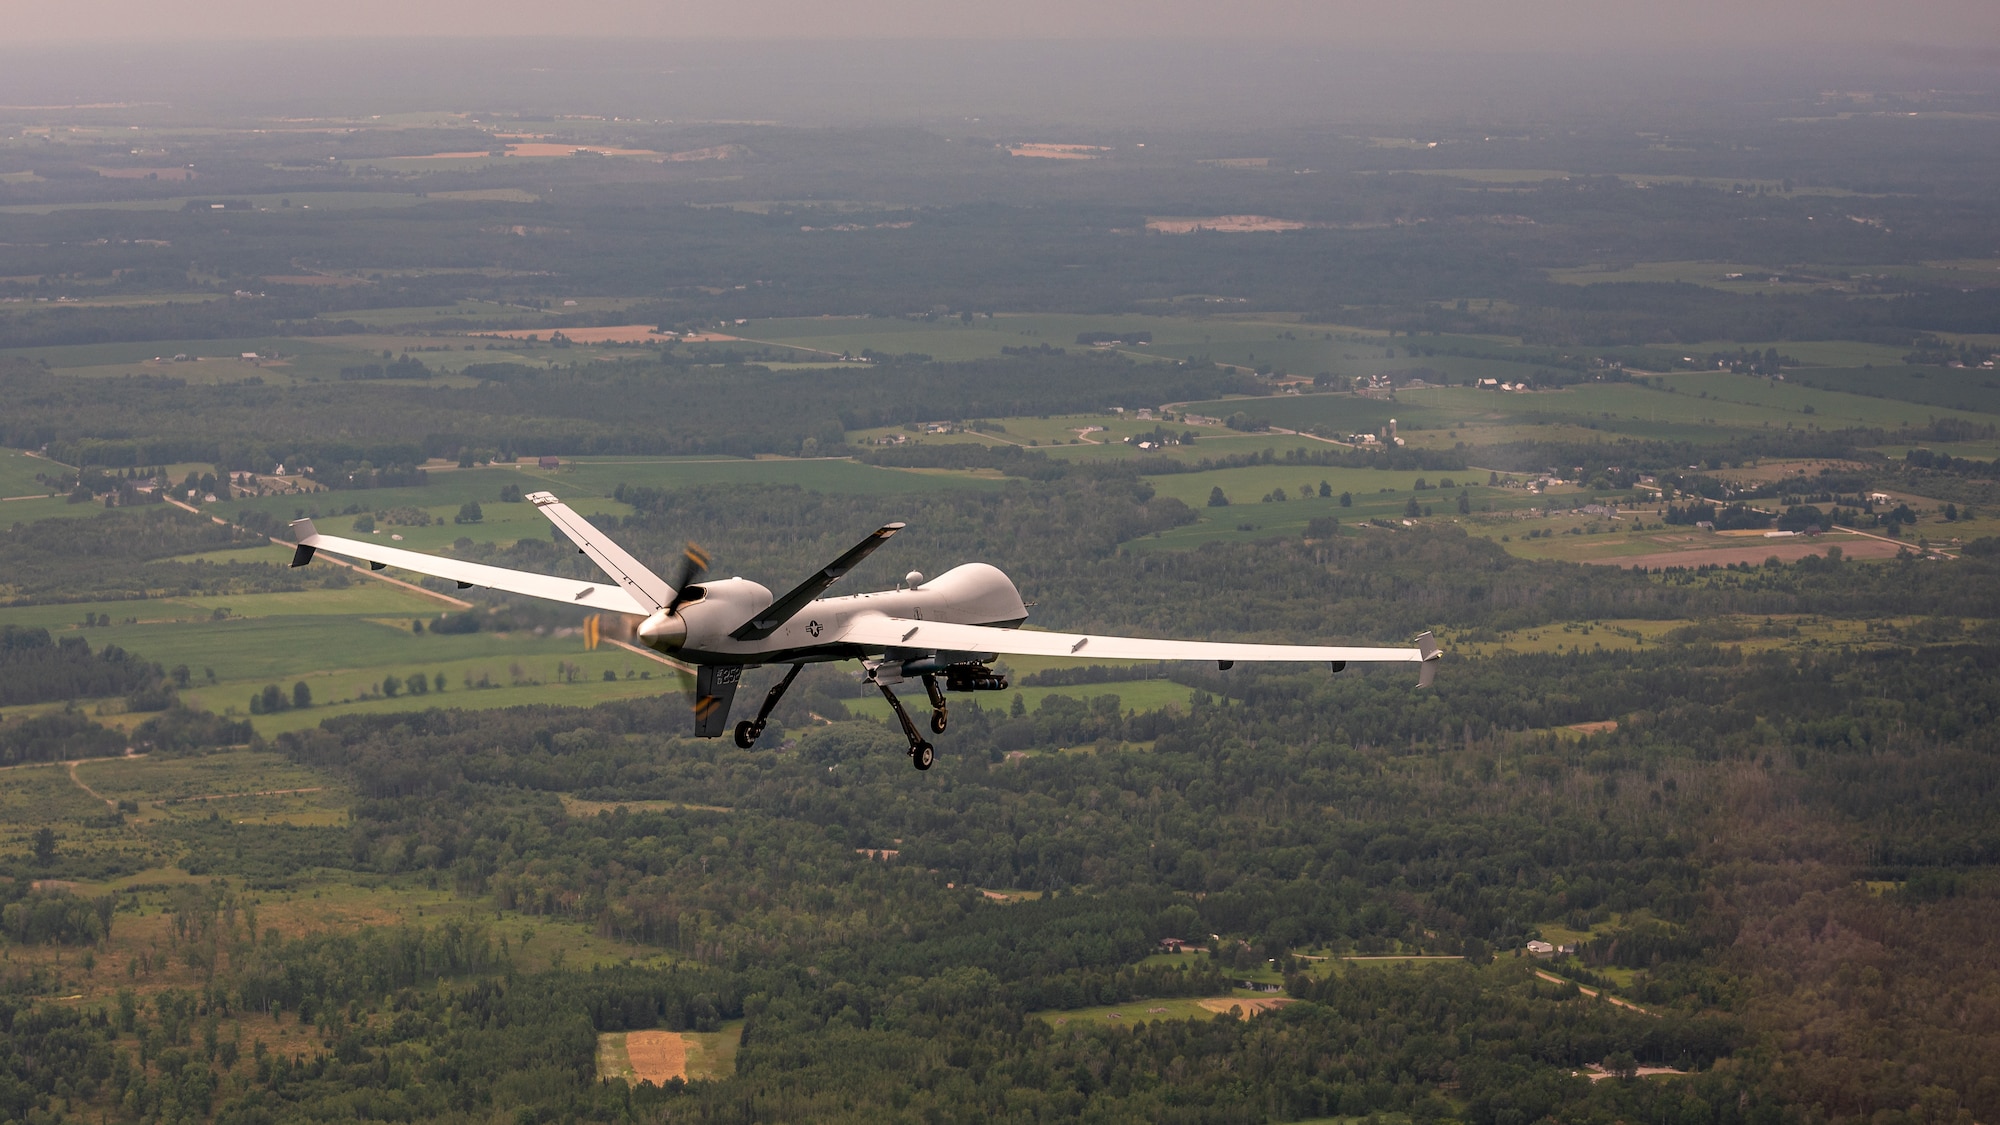 An MQ-9 Reaper assigned to the 214th Attack Group, Arizona Air National Guard, flies over Alpena, Mich., during a training sortie during Northern Strike 19 at the Alpena Combat Readiness Training Center, July 24, 2019. 2019 marked the remotely piloted aircraft’s historical debut at the joint force, multinational combat exercise. (U.S. Air National Guard photo by Tech. Sgt. Lealan Buehrer)